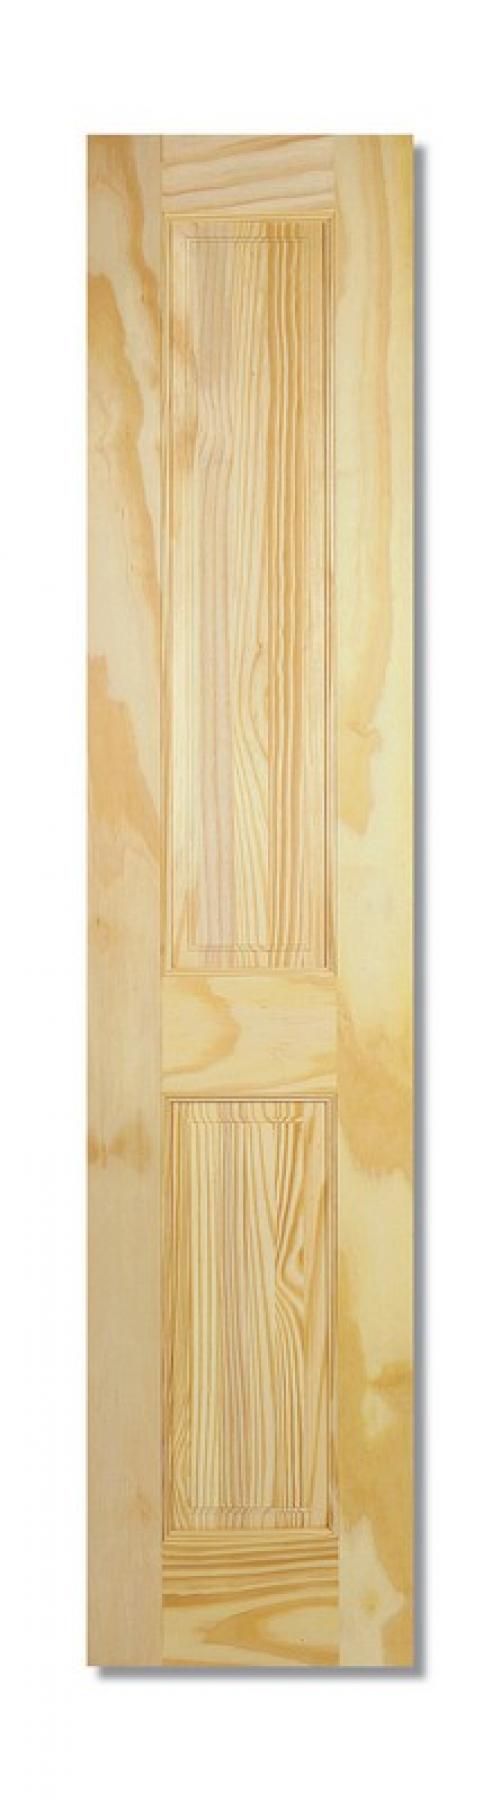 Image for 78X24 4 PANEL CLEAR PINE